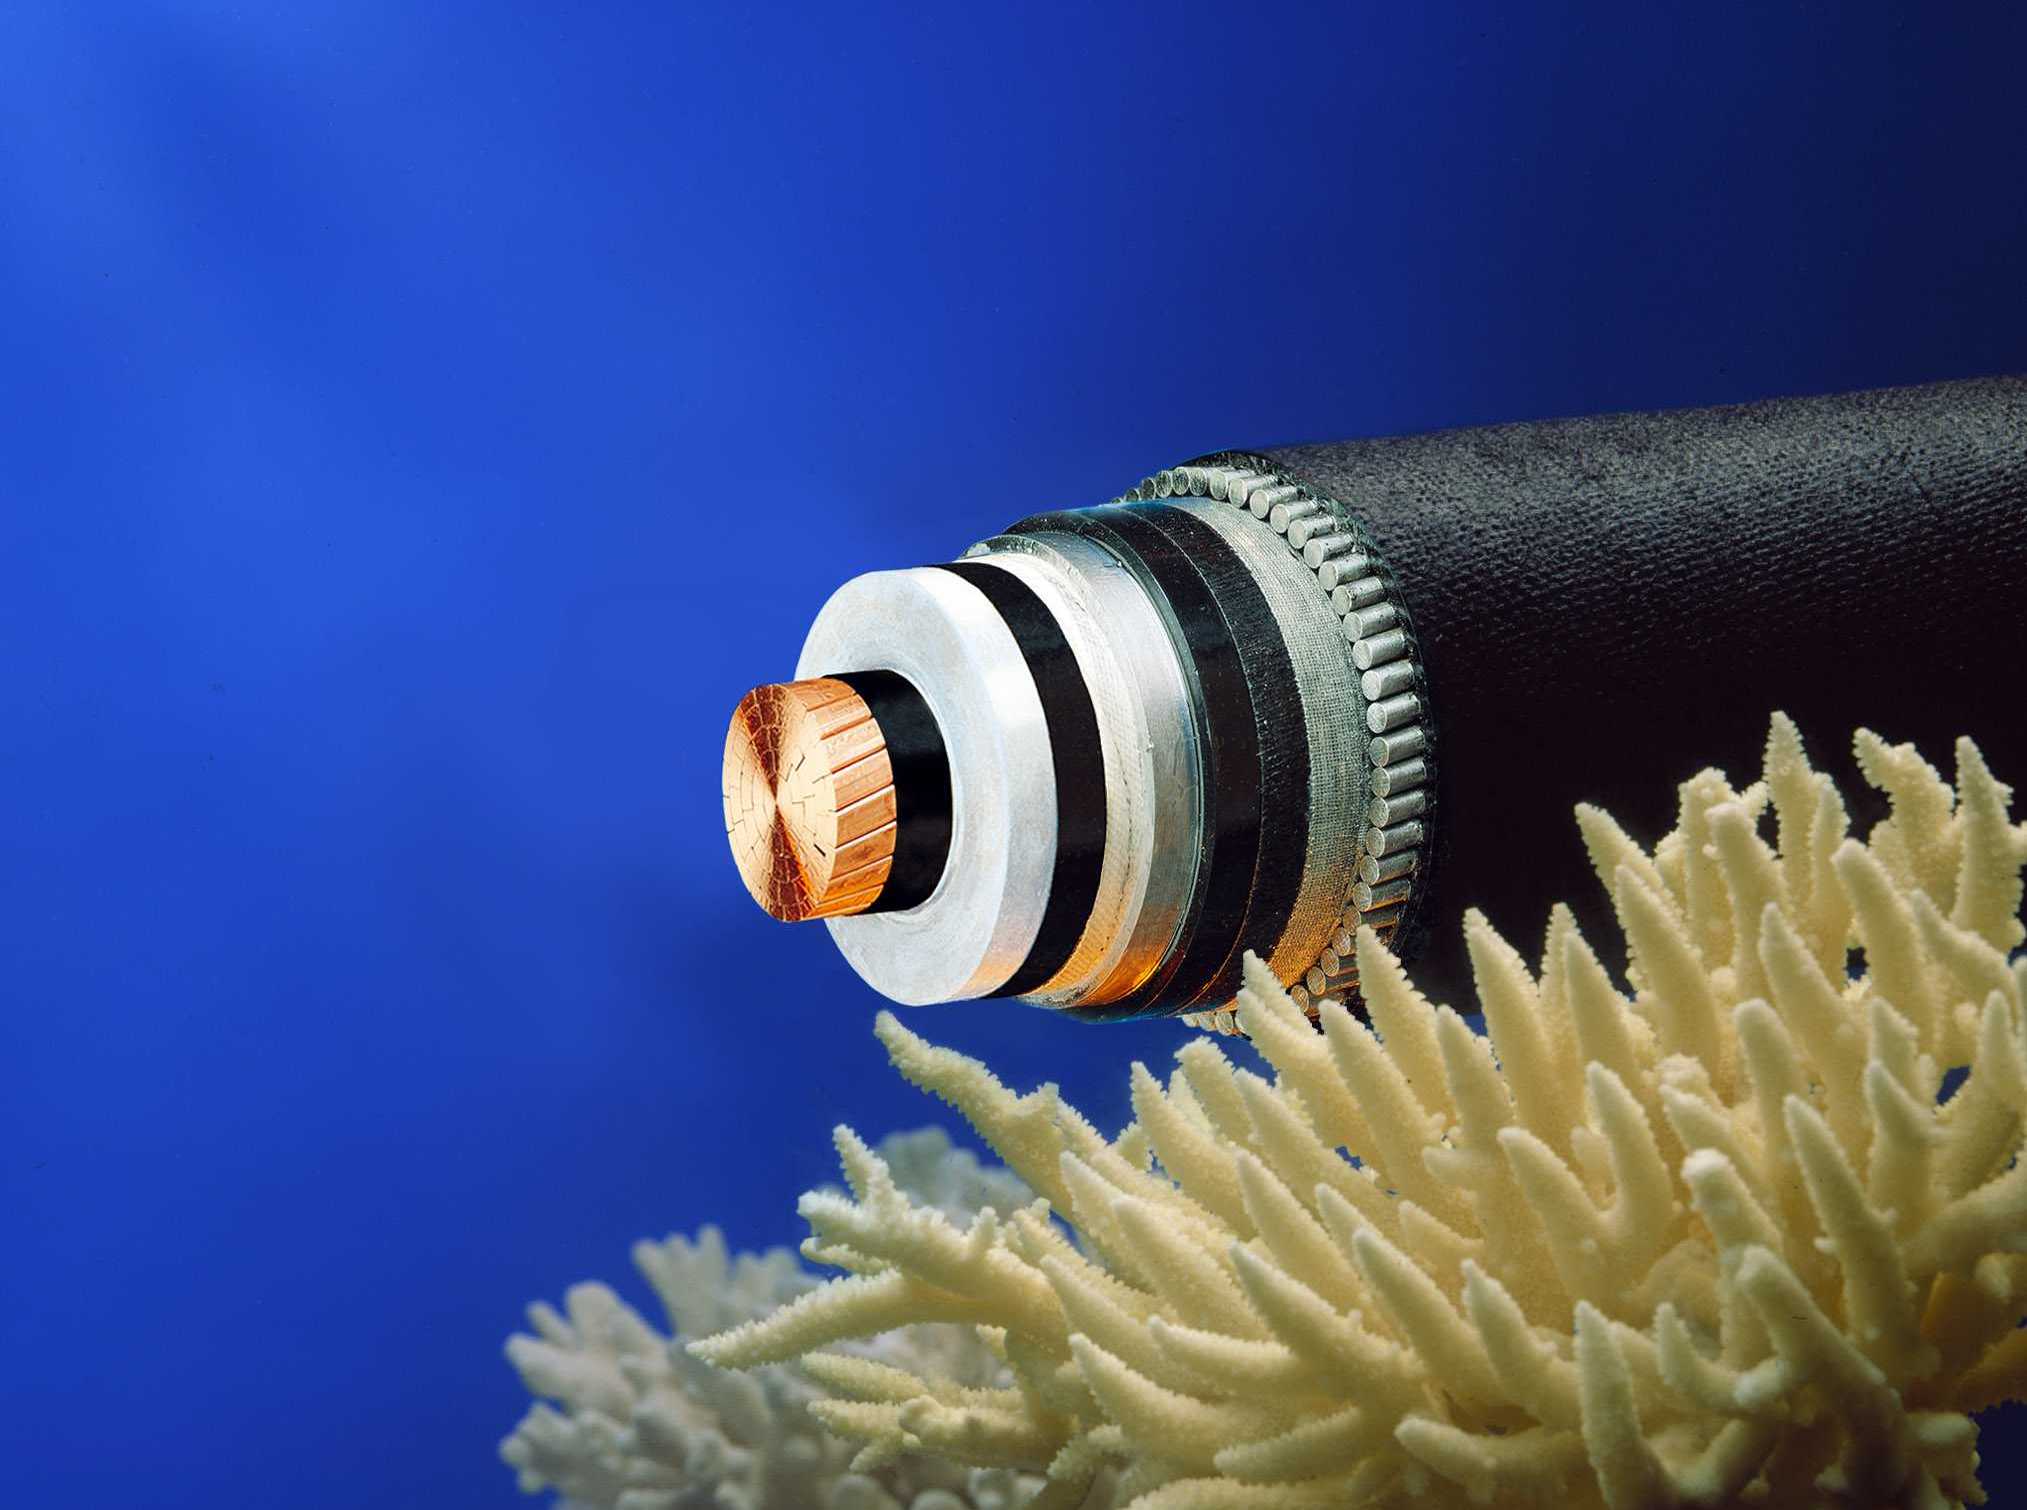 Underwater Power Transmission Projects to Increase Five Times by 2020 (USA)